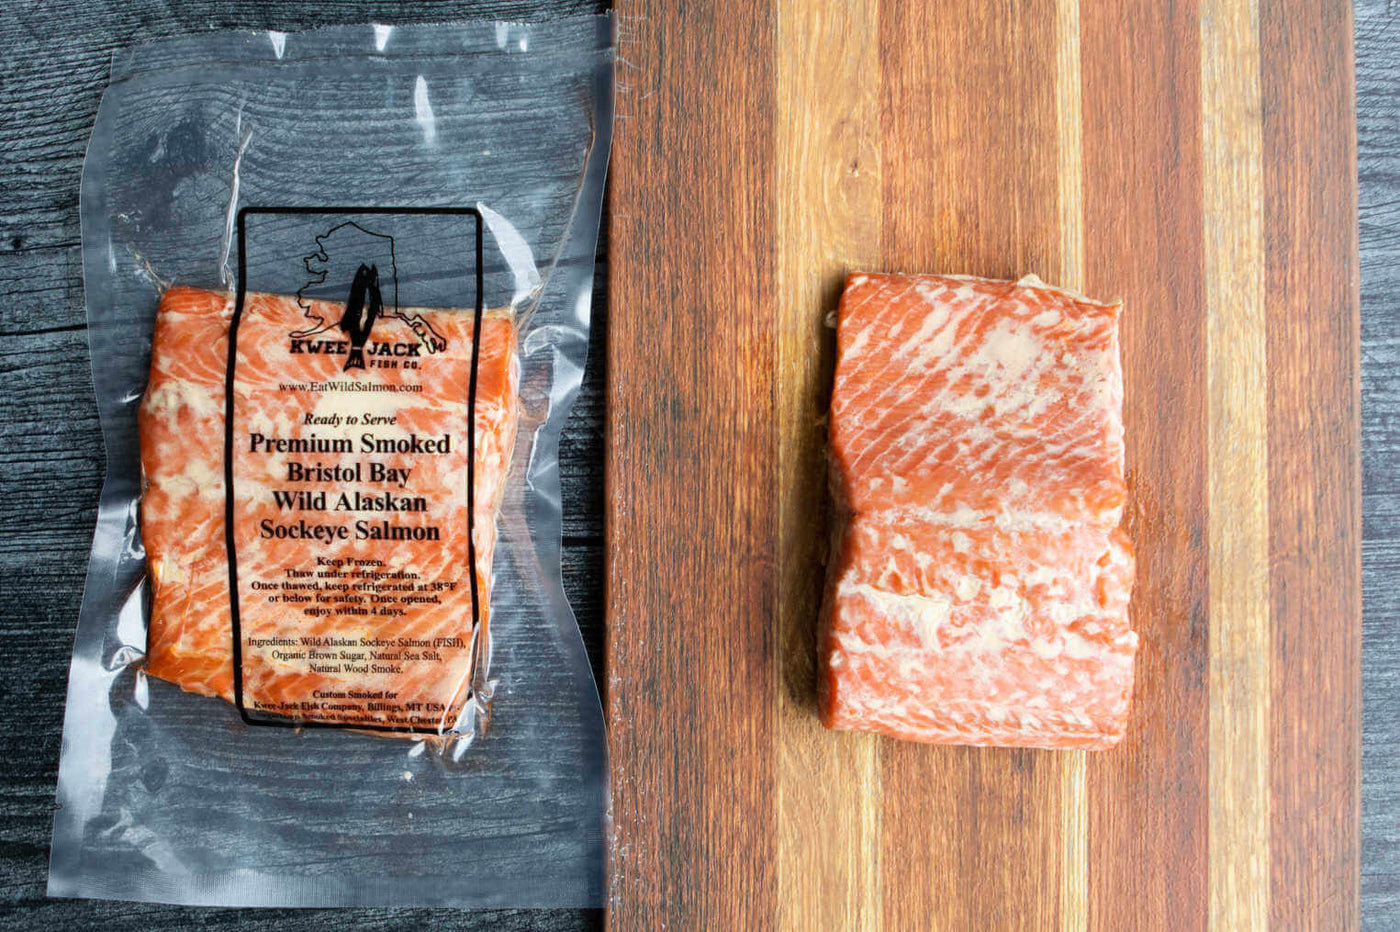 Kwee-Jack Fish Co. Wild Caught Alaskan Traditional Smoked Salmon in vacuum packaging and on wooden cutting board.